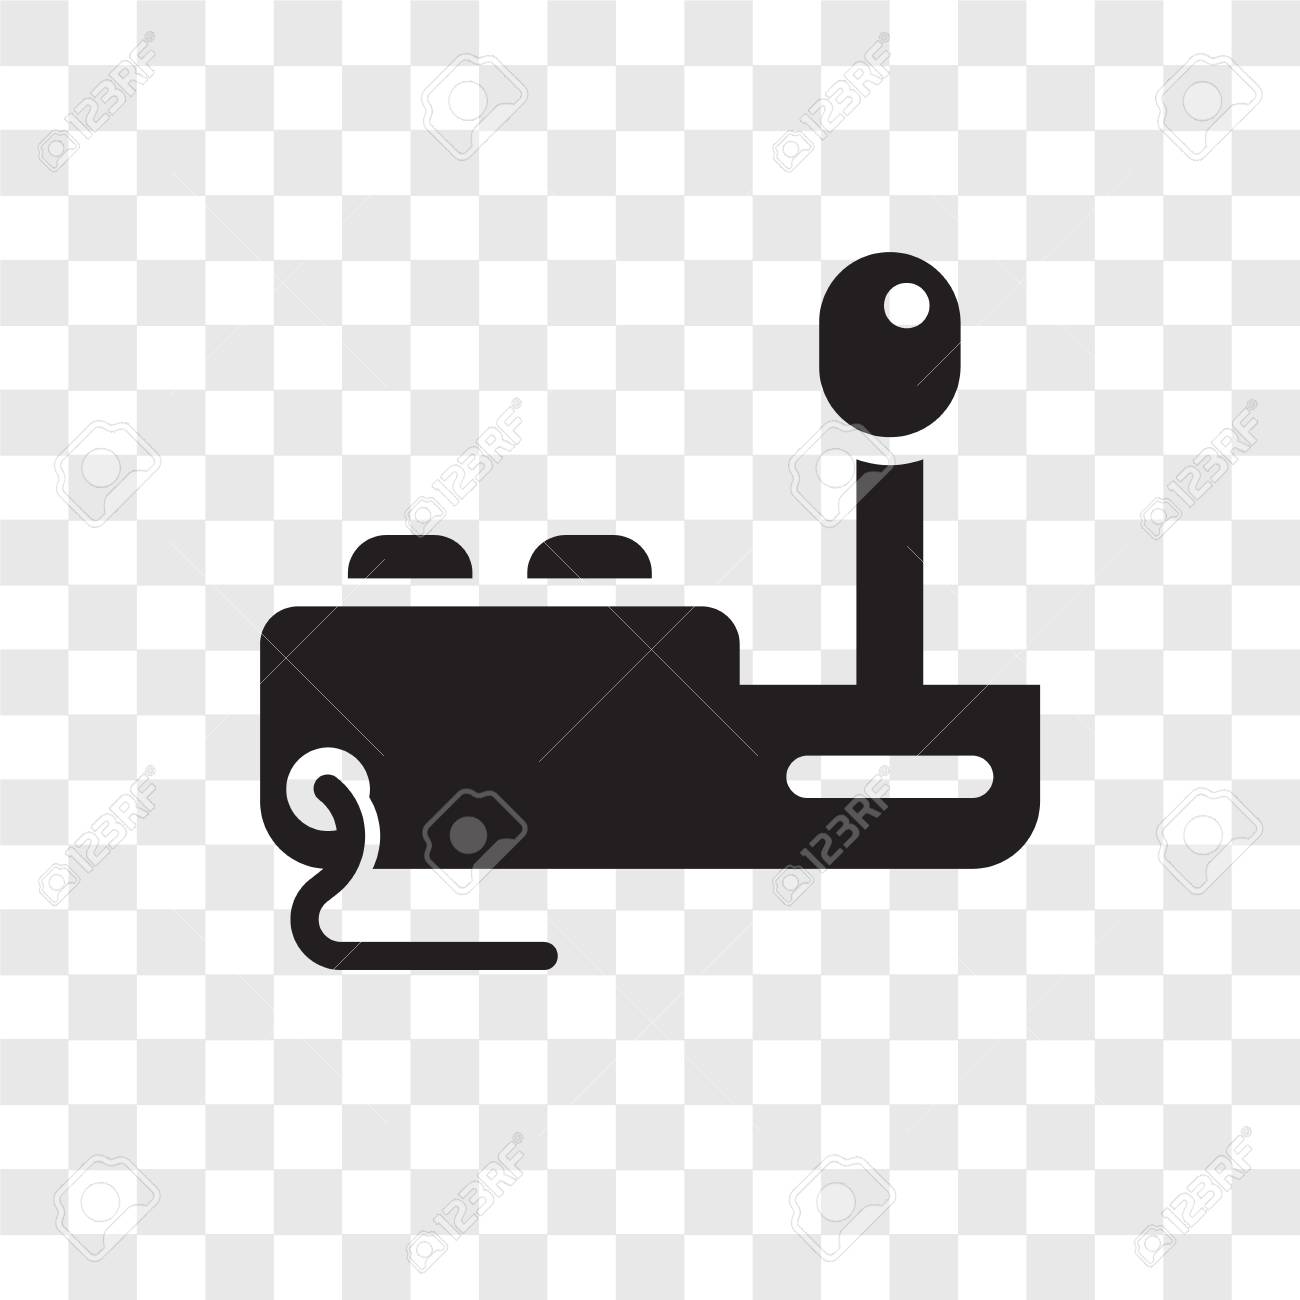 Joystick Vector Icon Isolated On Transparent Background